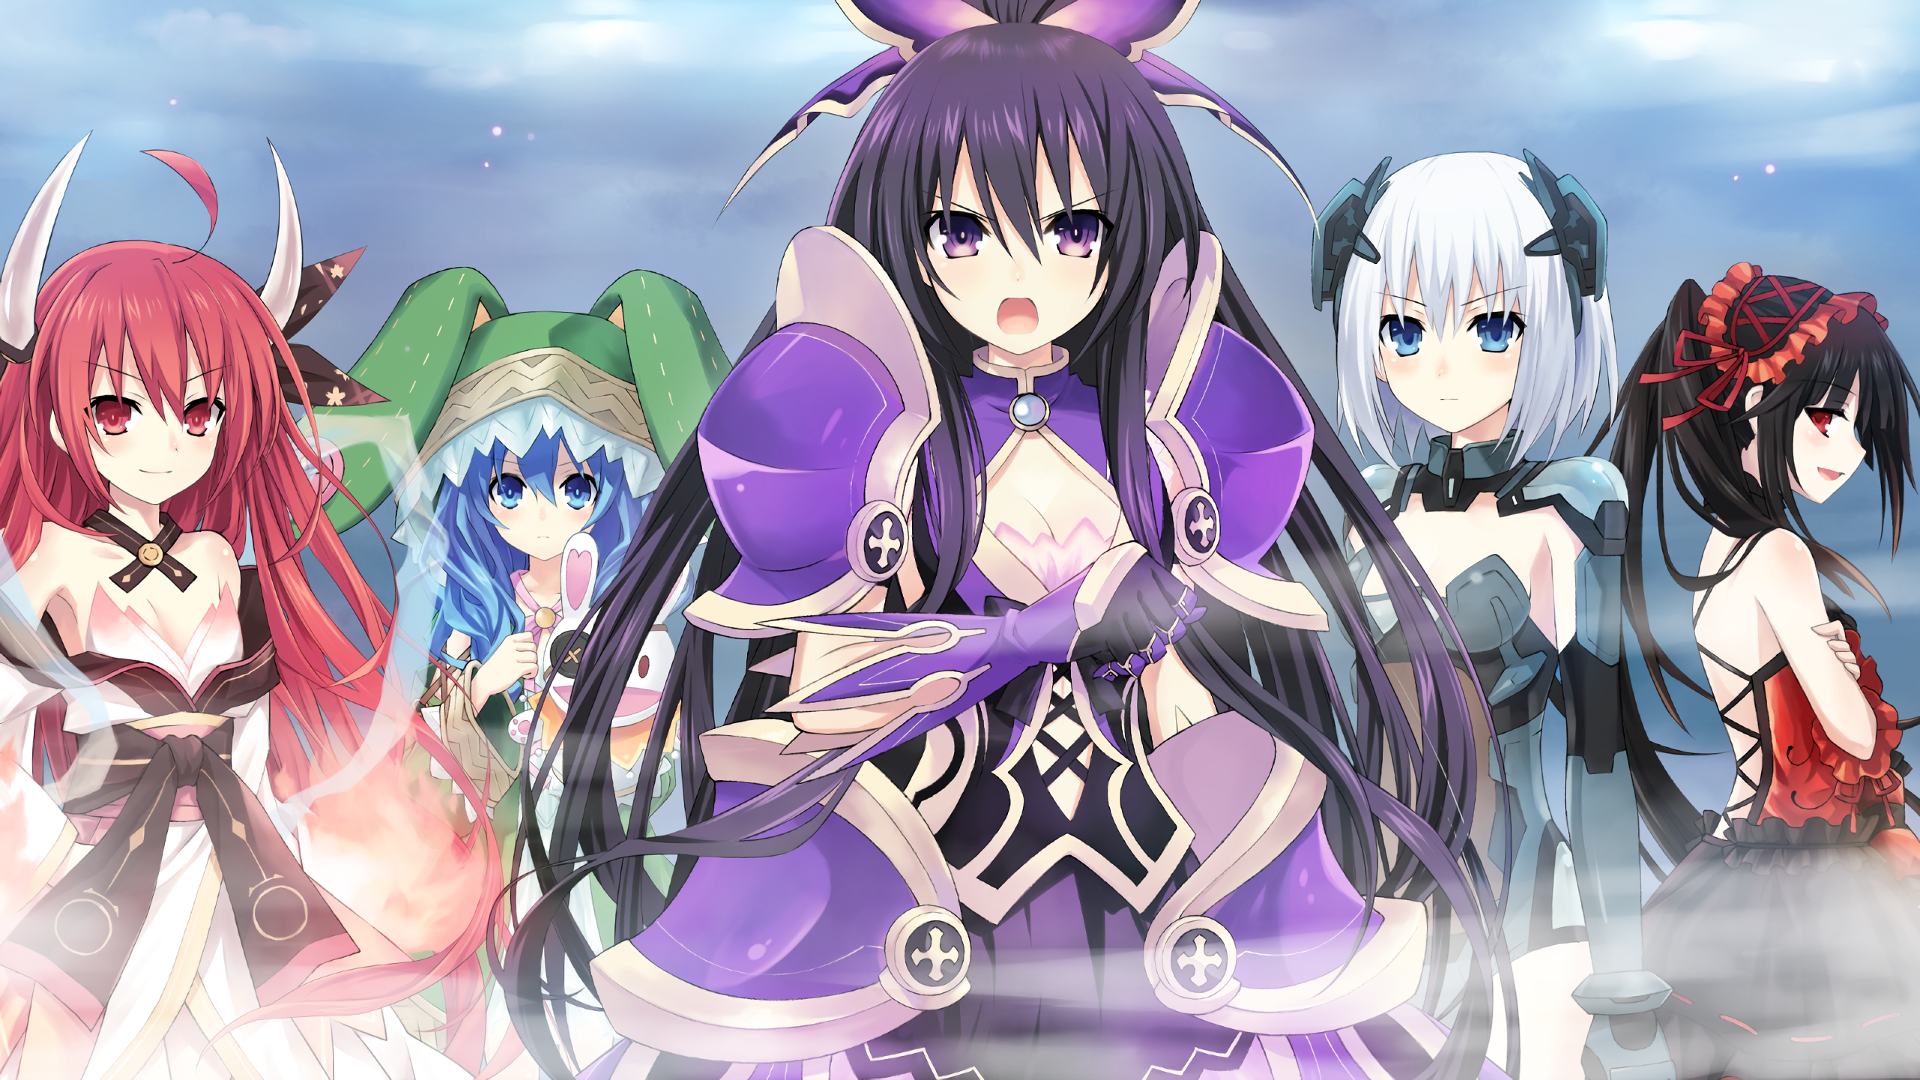 1920x1080 Date A Live Wallpaper Background Image. 